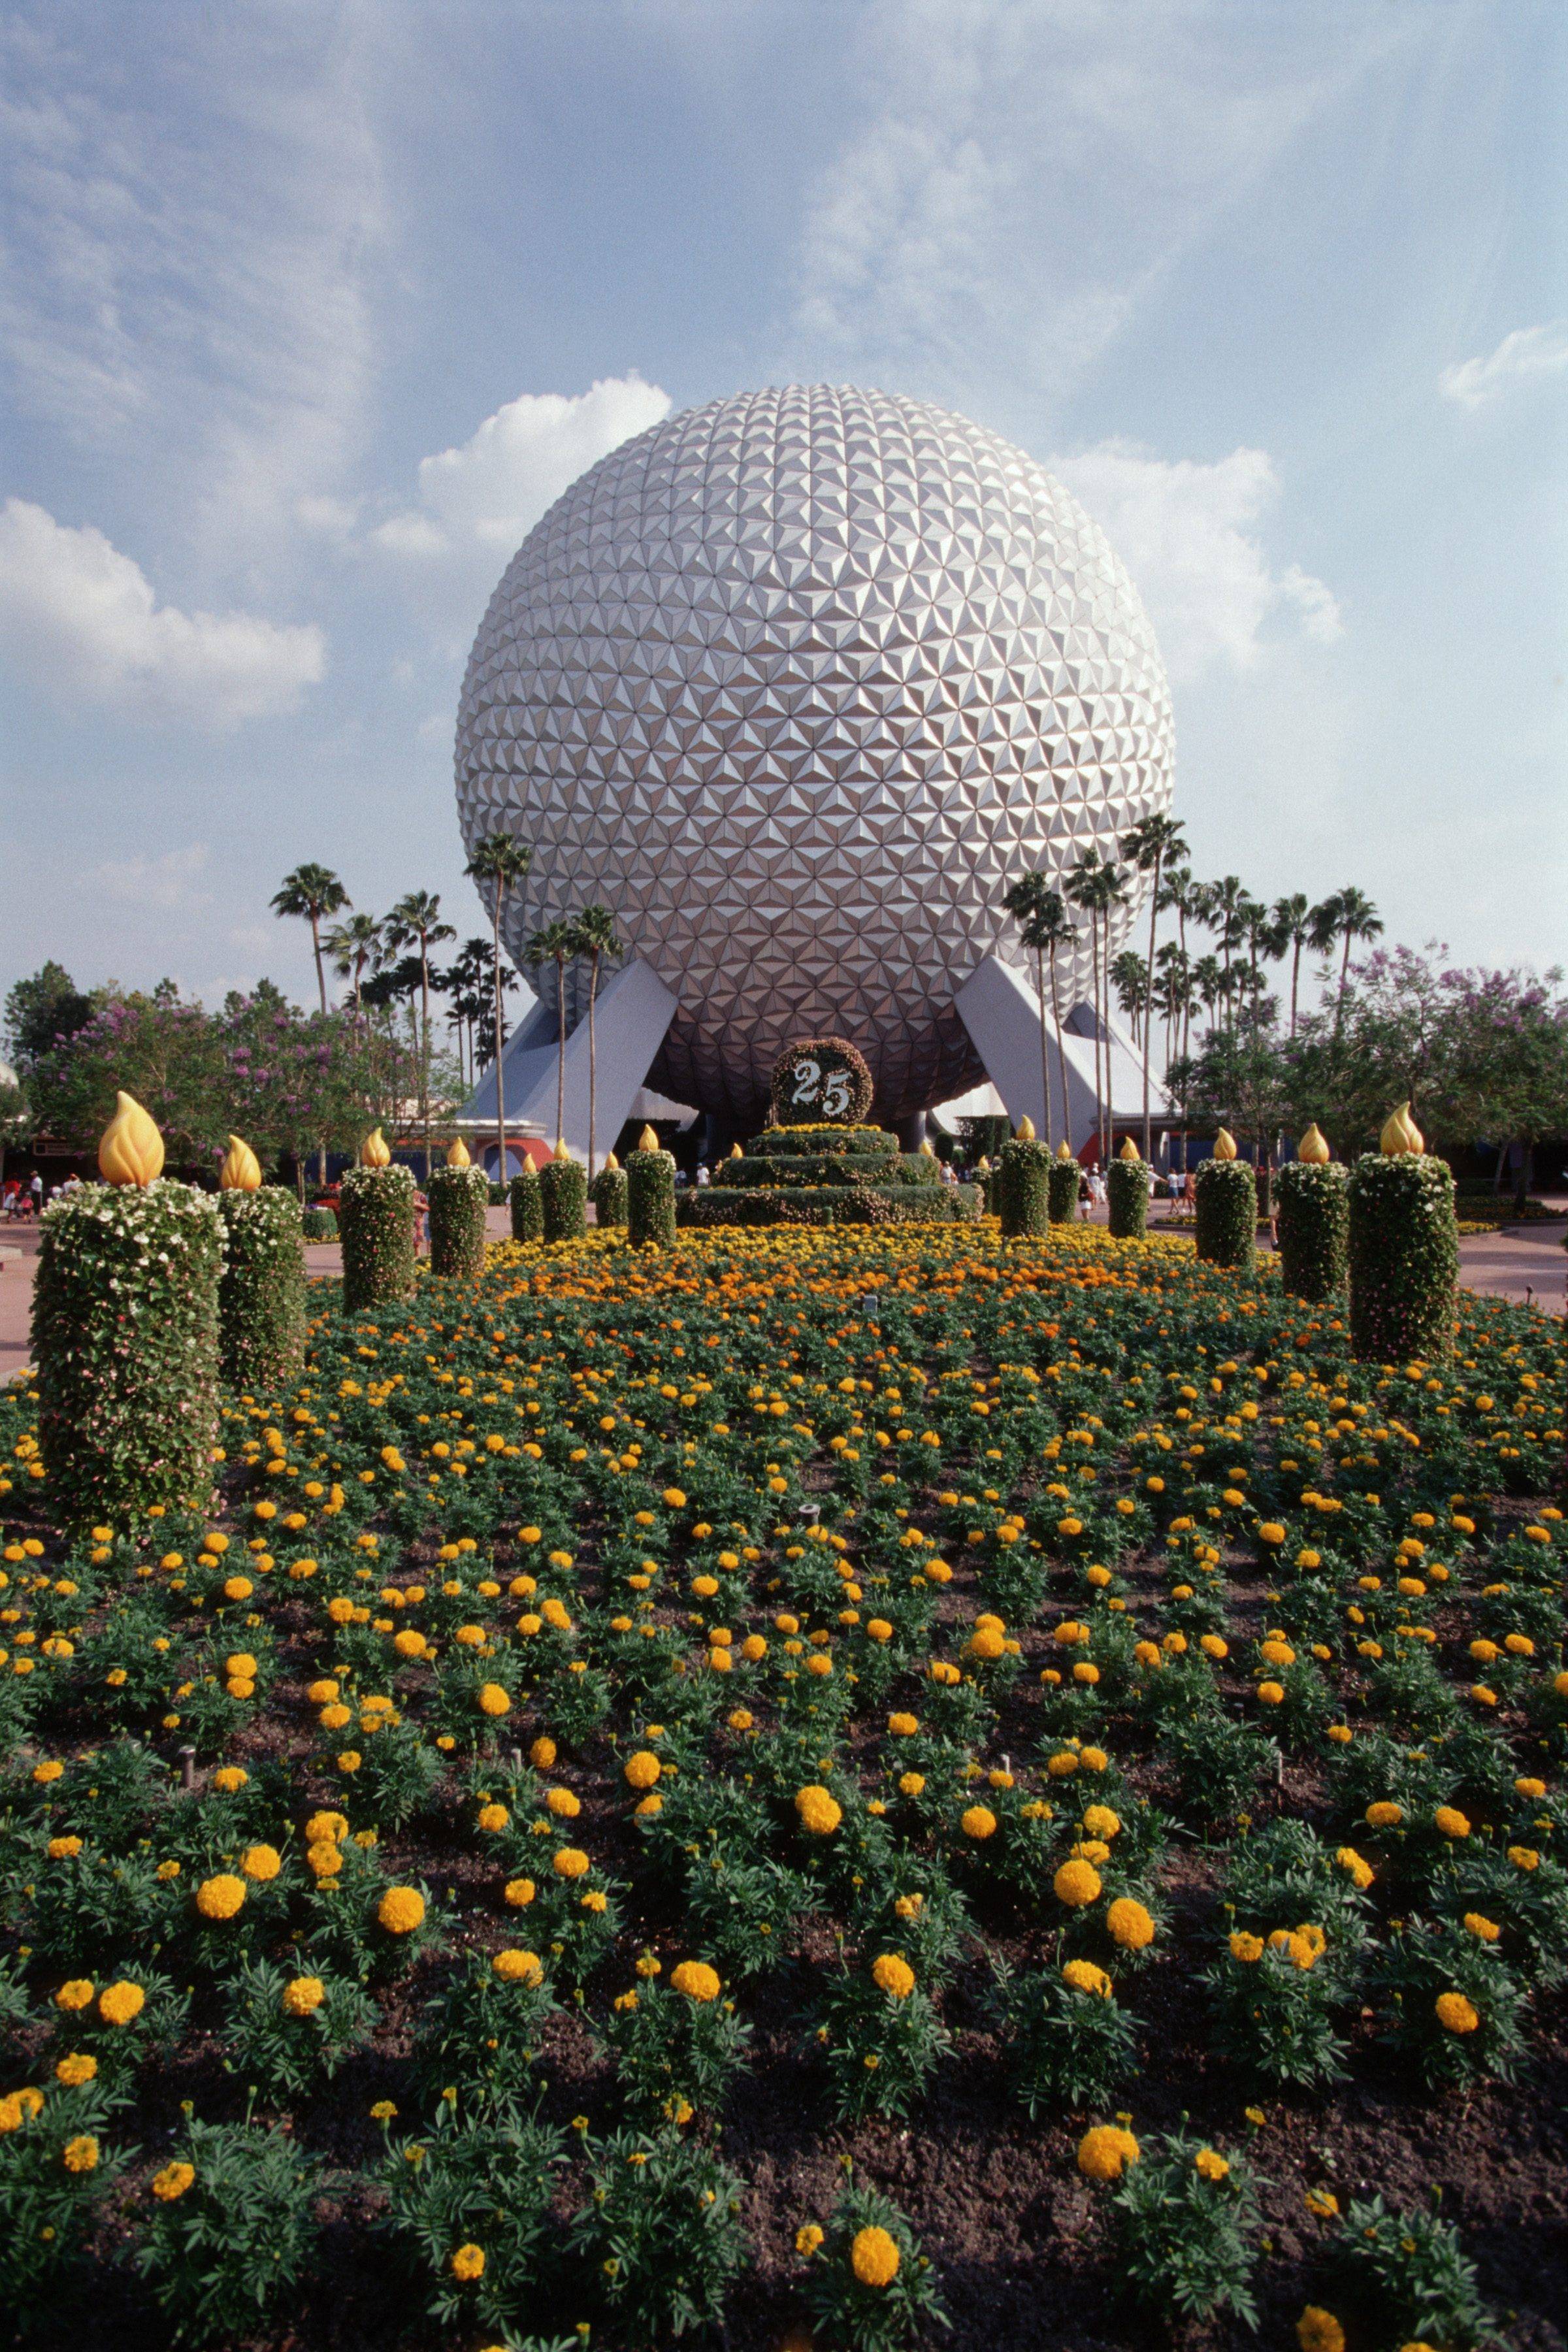 The entryway of EPCOT is decorated to celebrate the 25th Anniversary of Walt Disney World in 1997